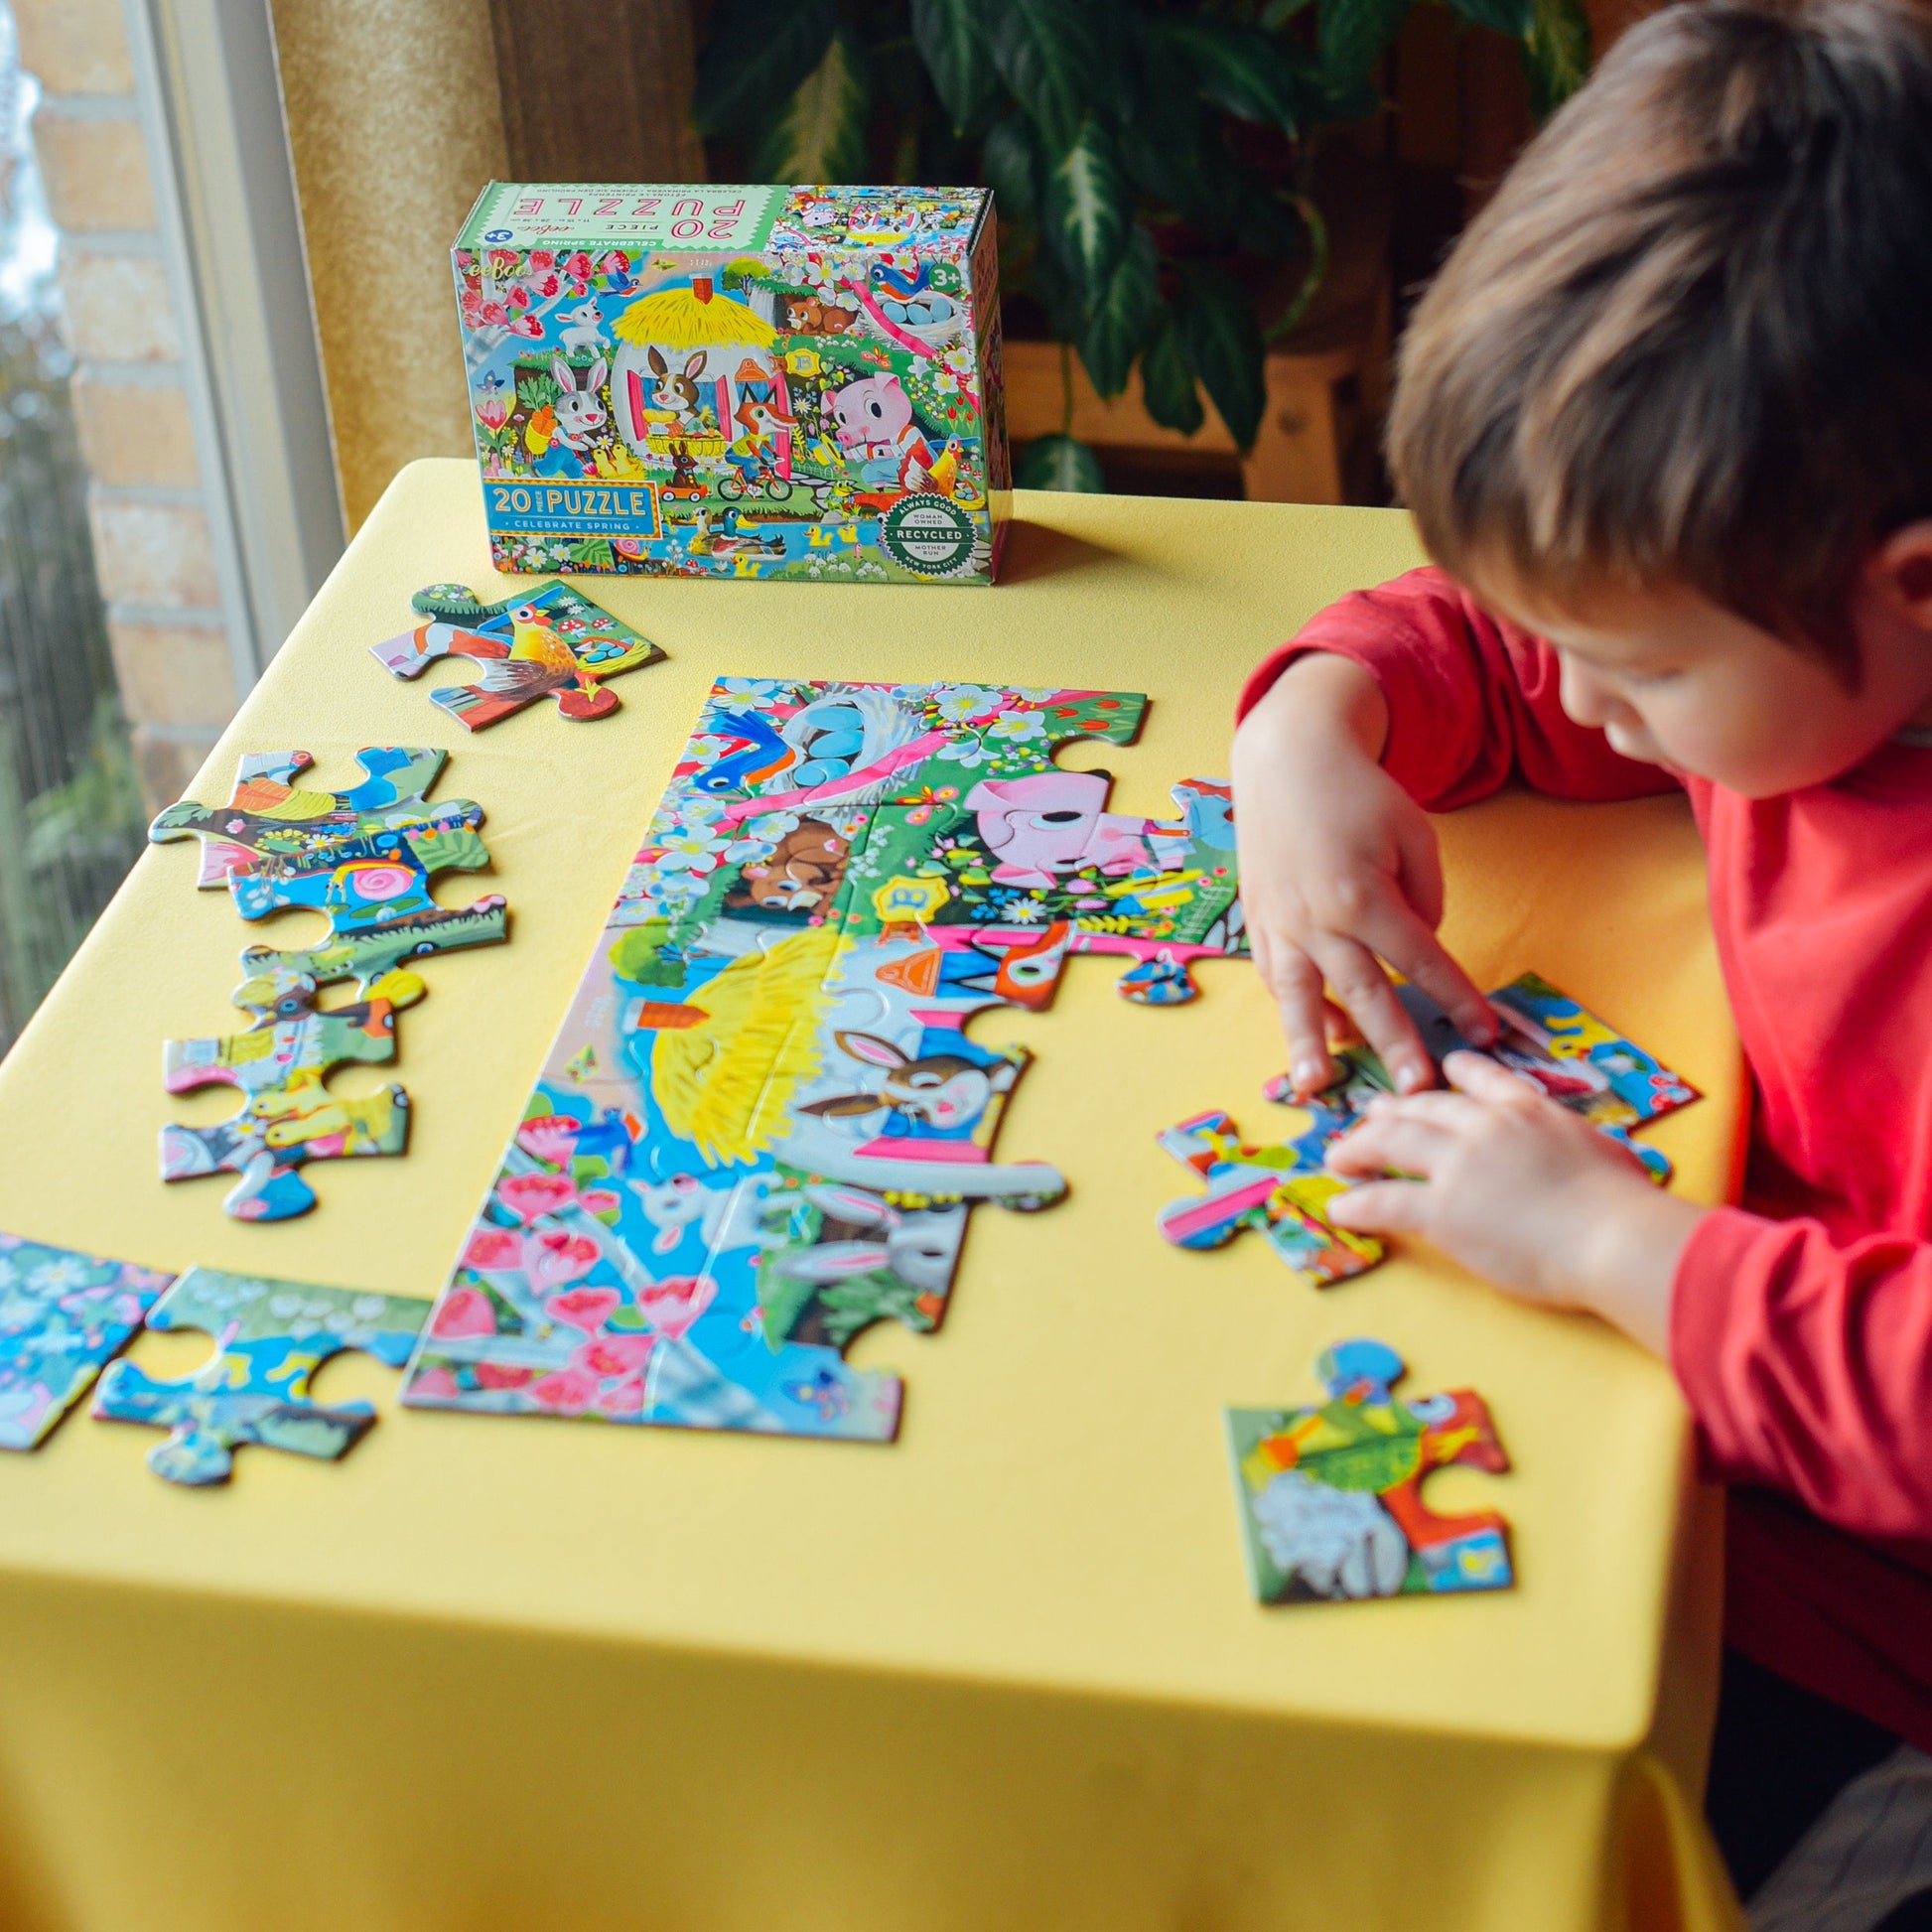 Celebrate Spring 20 Piece Jigsaw Puzzle | Fun Unique Gift for Ages 3+ | Find bunnies, ducks, lambs, birds and more